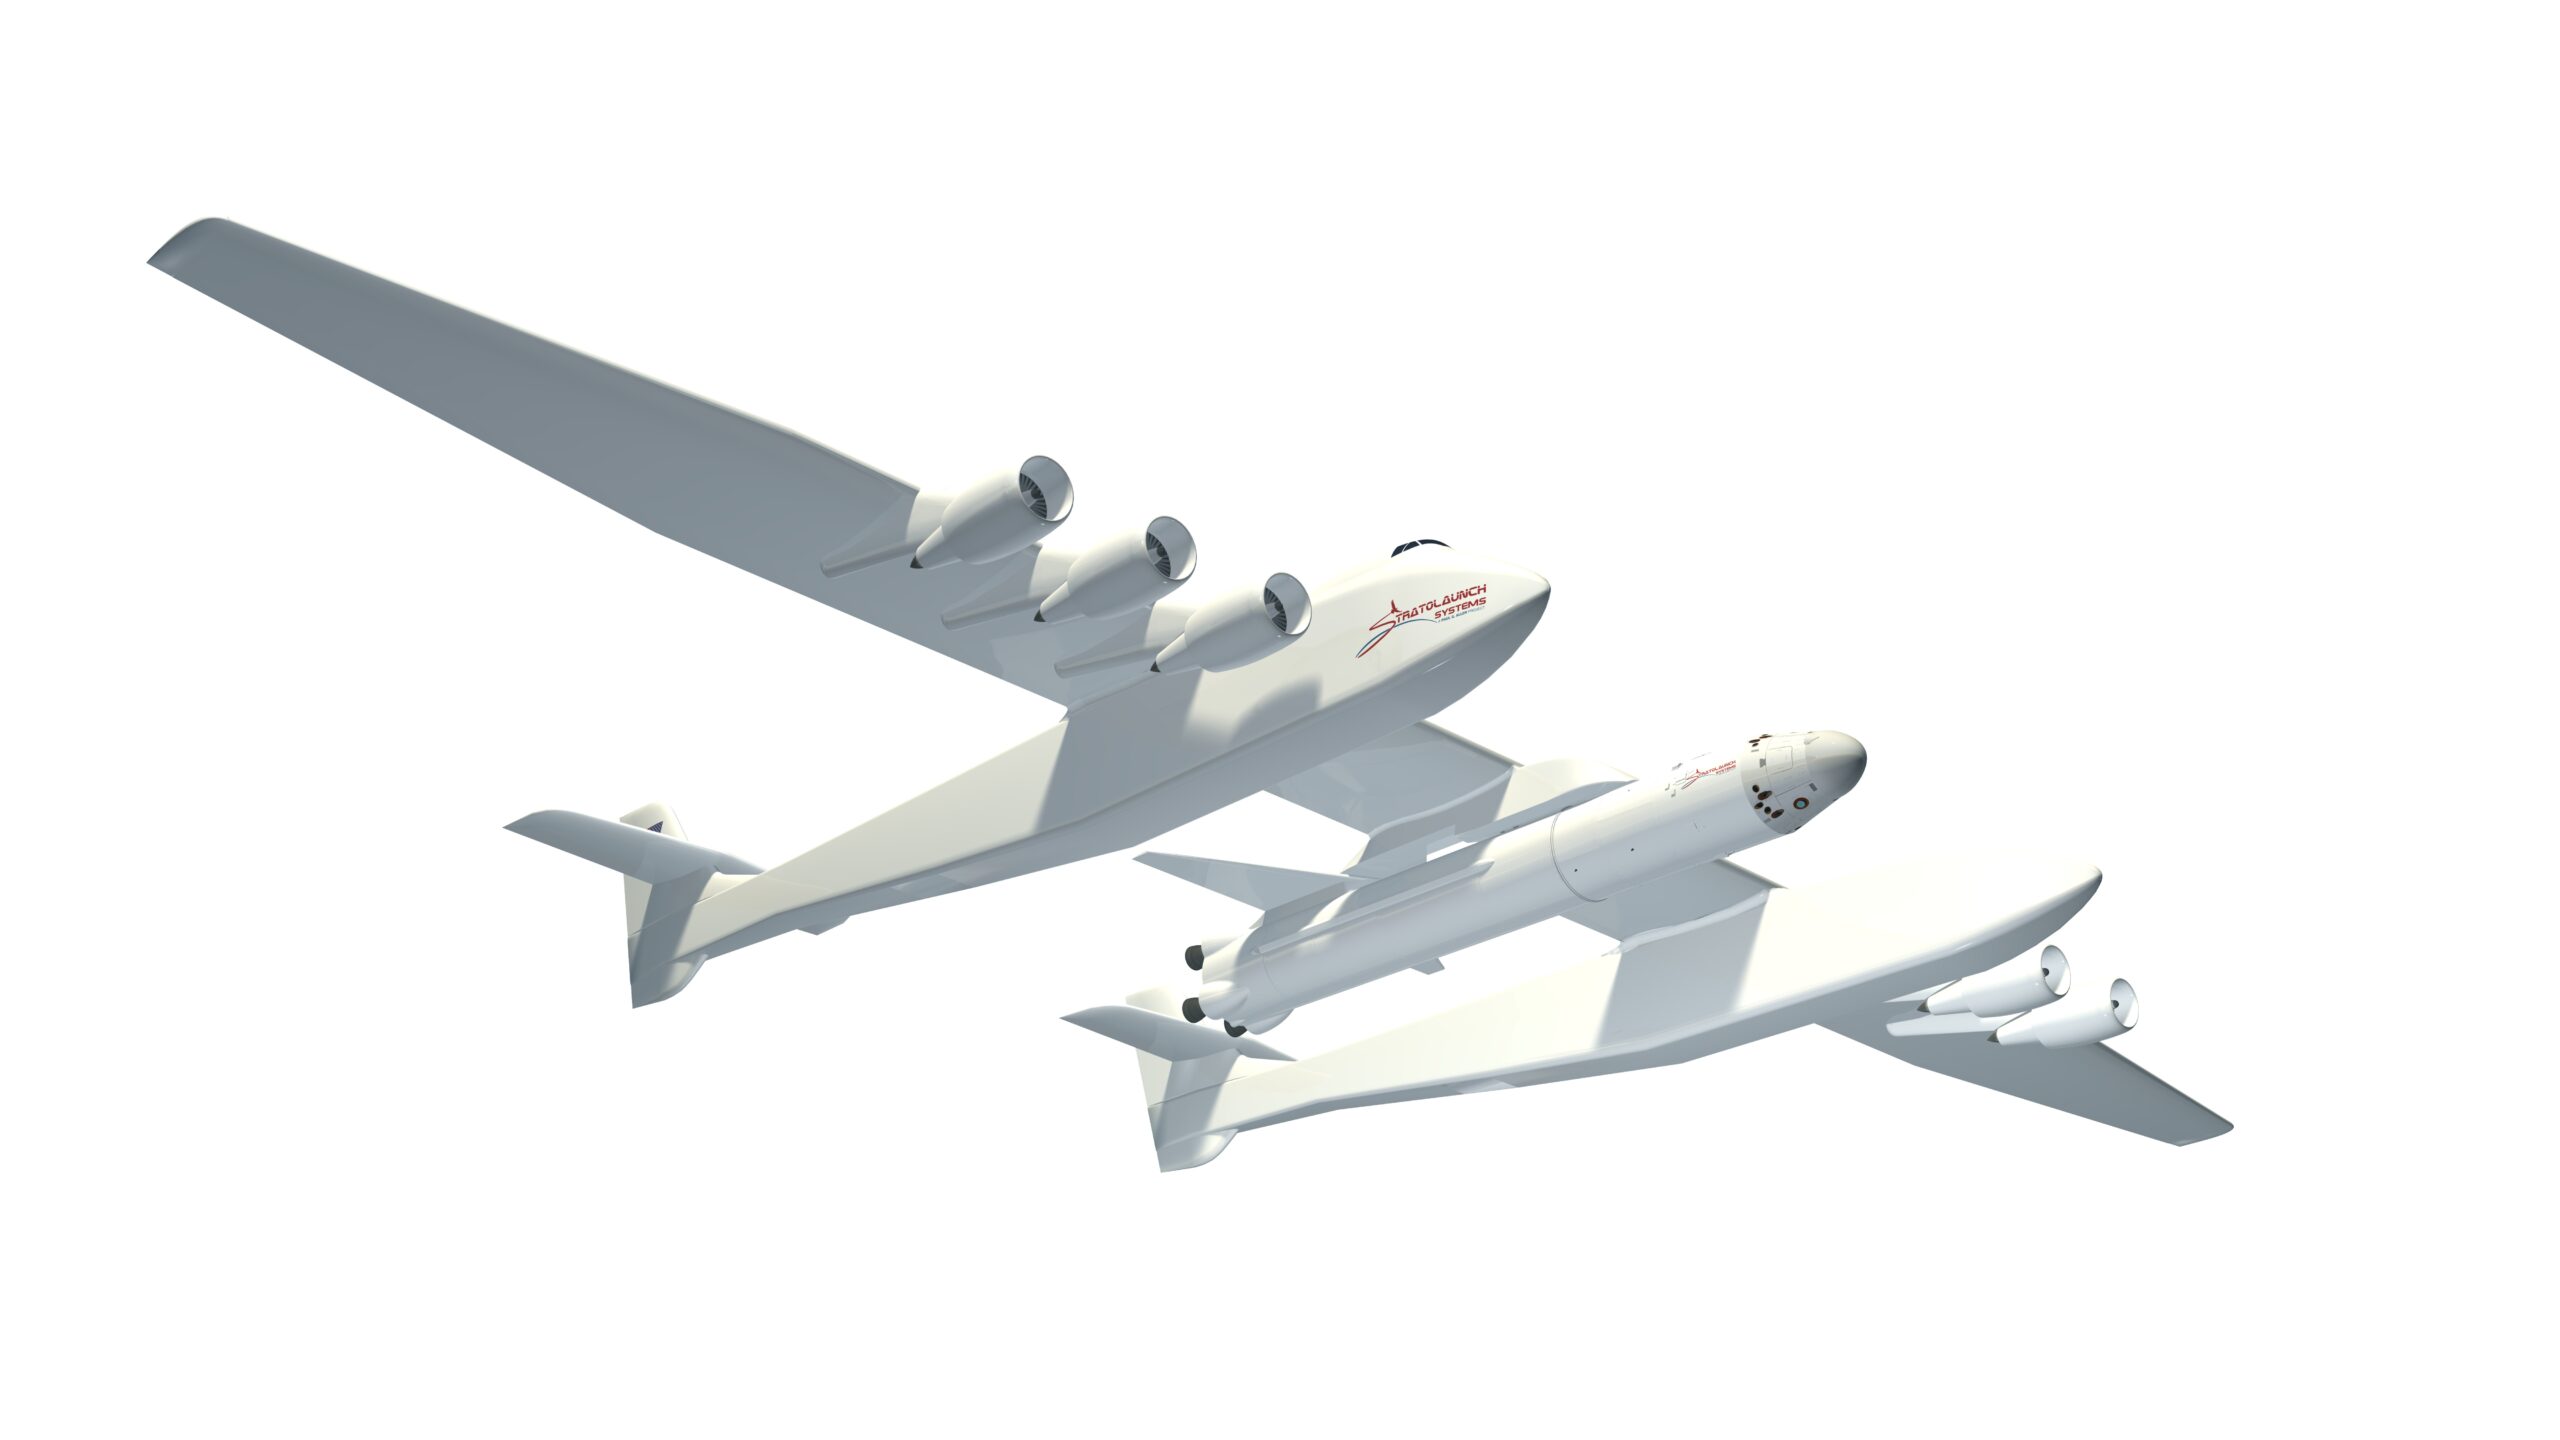 Brand-New Stratolaunch, the Biggest Plane in the World, Could Replace the Space Shuttle